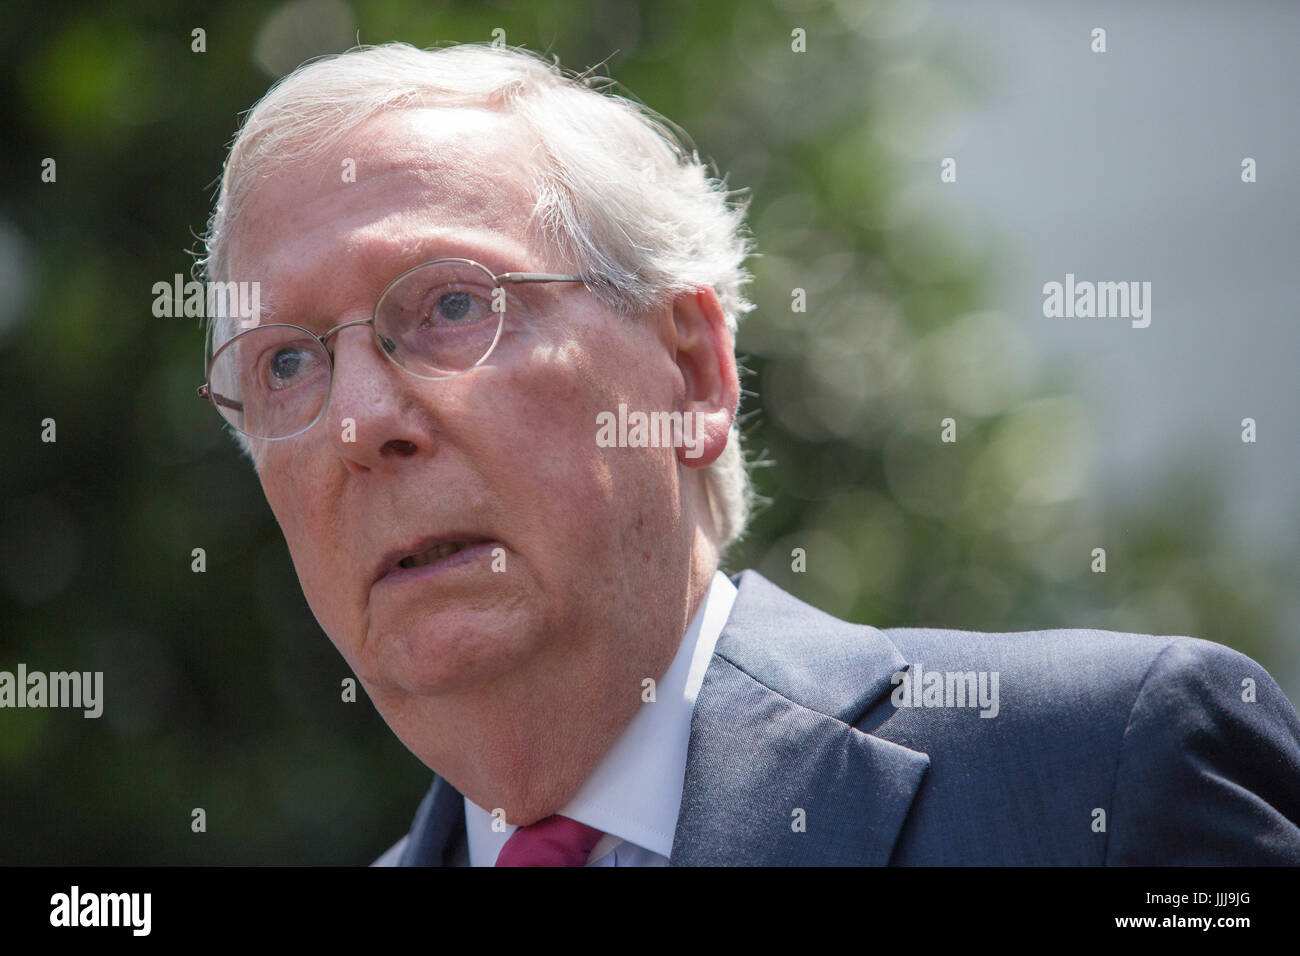 Washington DC, USA. 19th July, 2017. United States Senate Majority Leader Mitch McConnell (Republican of Kentucky) speaks to the media after attending a meeting with US President Donald J. Trump on repealing and/or replacing the Affordable Care Act (ACA), also known as ObamaCare at The White House in Washington, DC, July 19, 2017.  Credit: Chris Kleponis / CNP Photo via Newscom/Alamy Live News Stock Photo